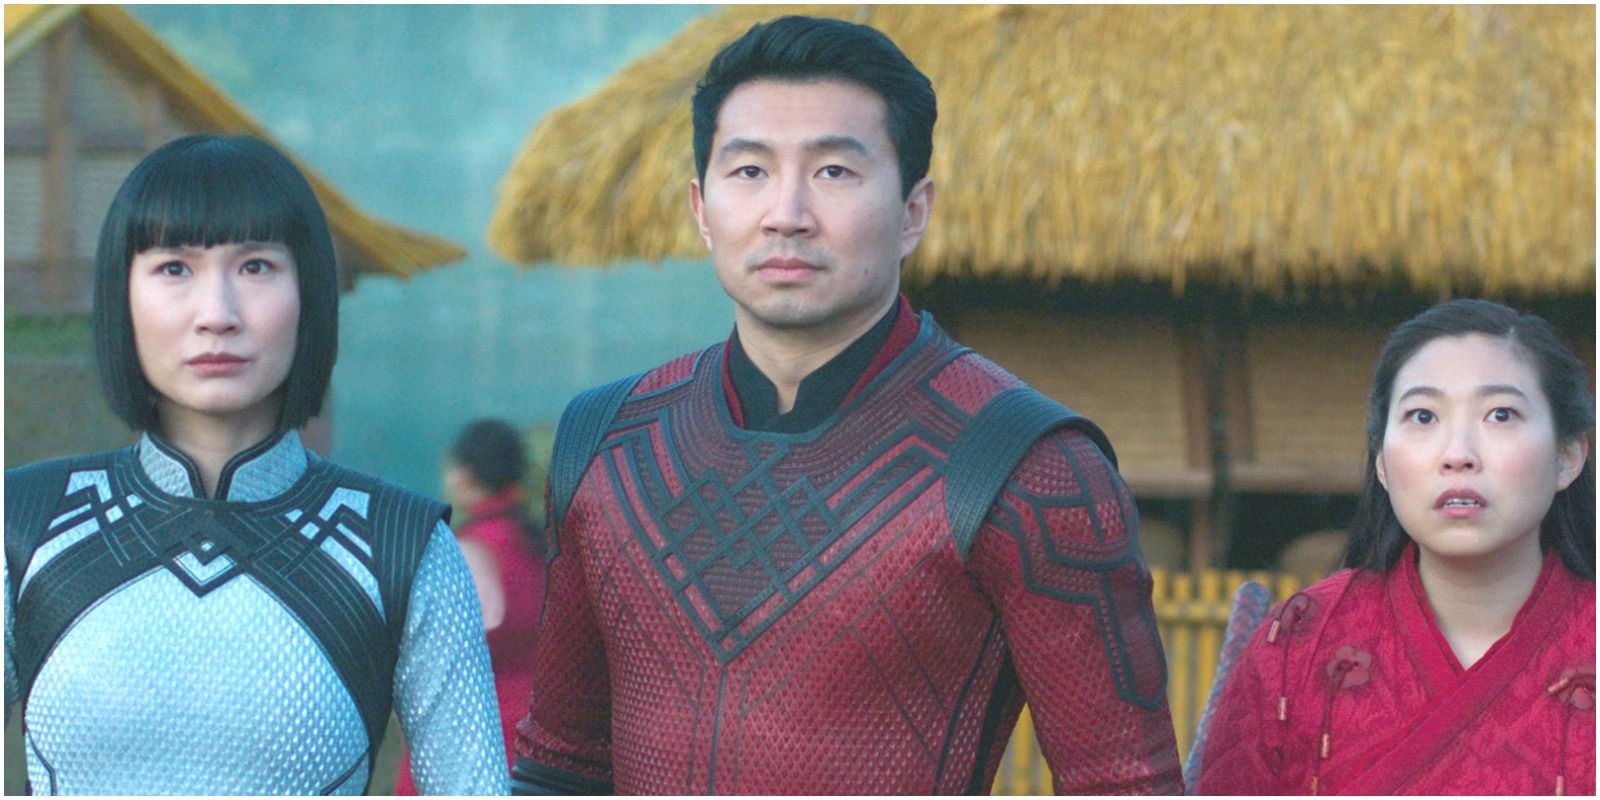 Shang Chi and his sister wearing Dragon Scale Suits given to them by their mother from the film